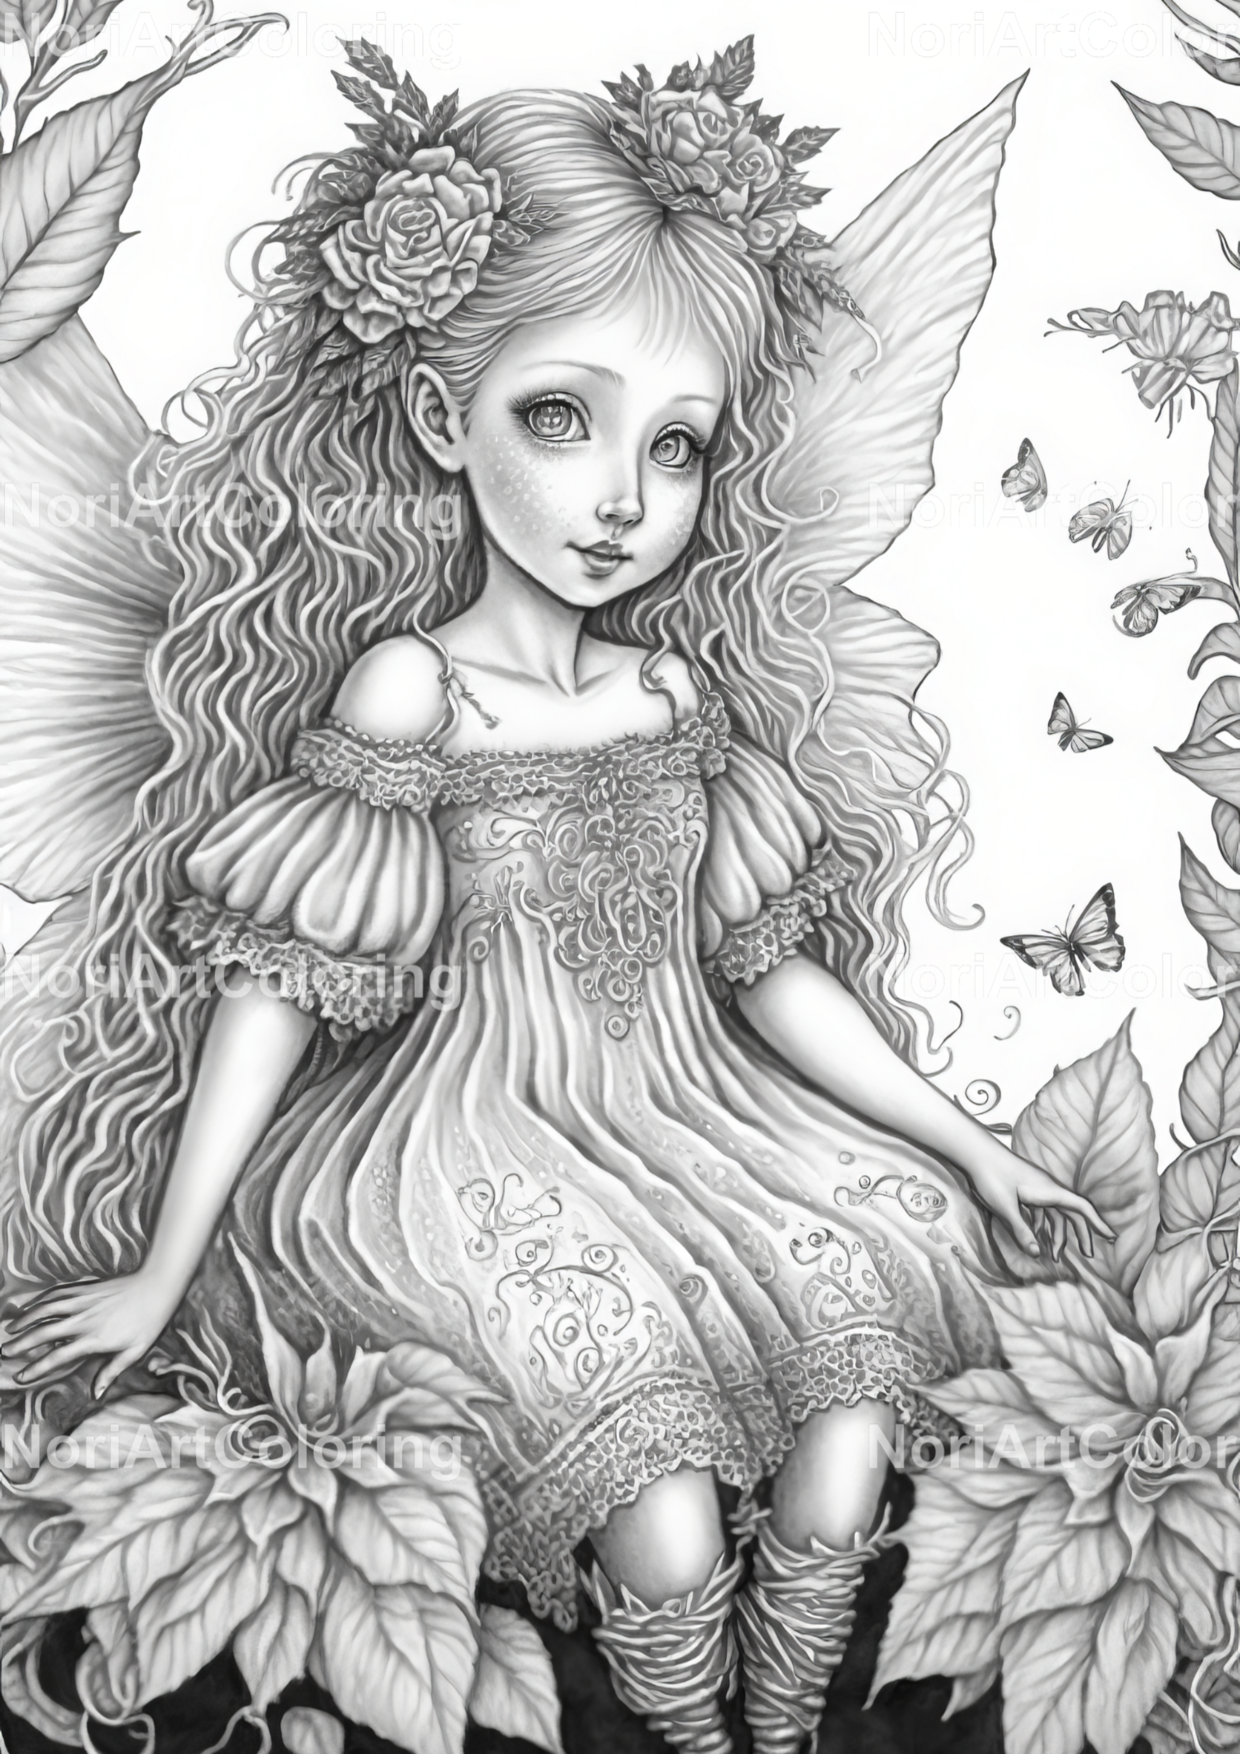 Beautiful fairies coloring pages dark forest printable adult coloring pages download grayscale illustration fairy gnomes